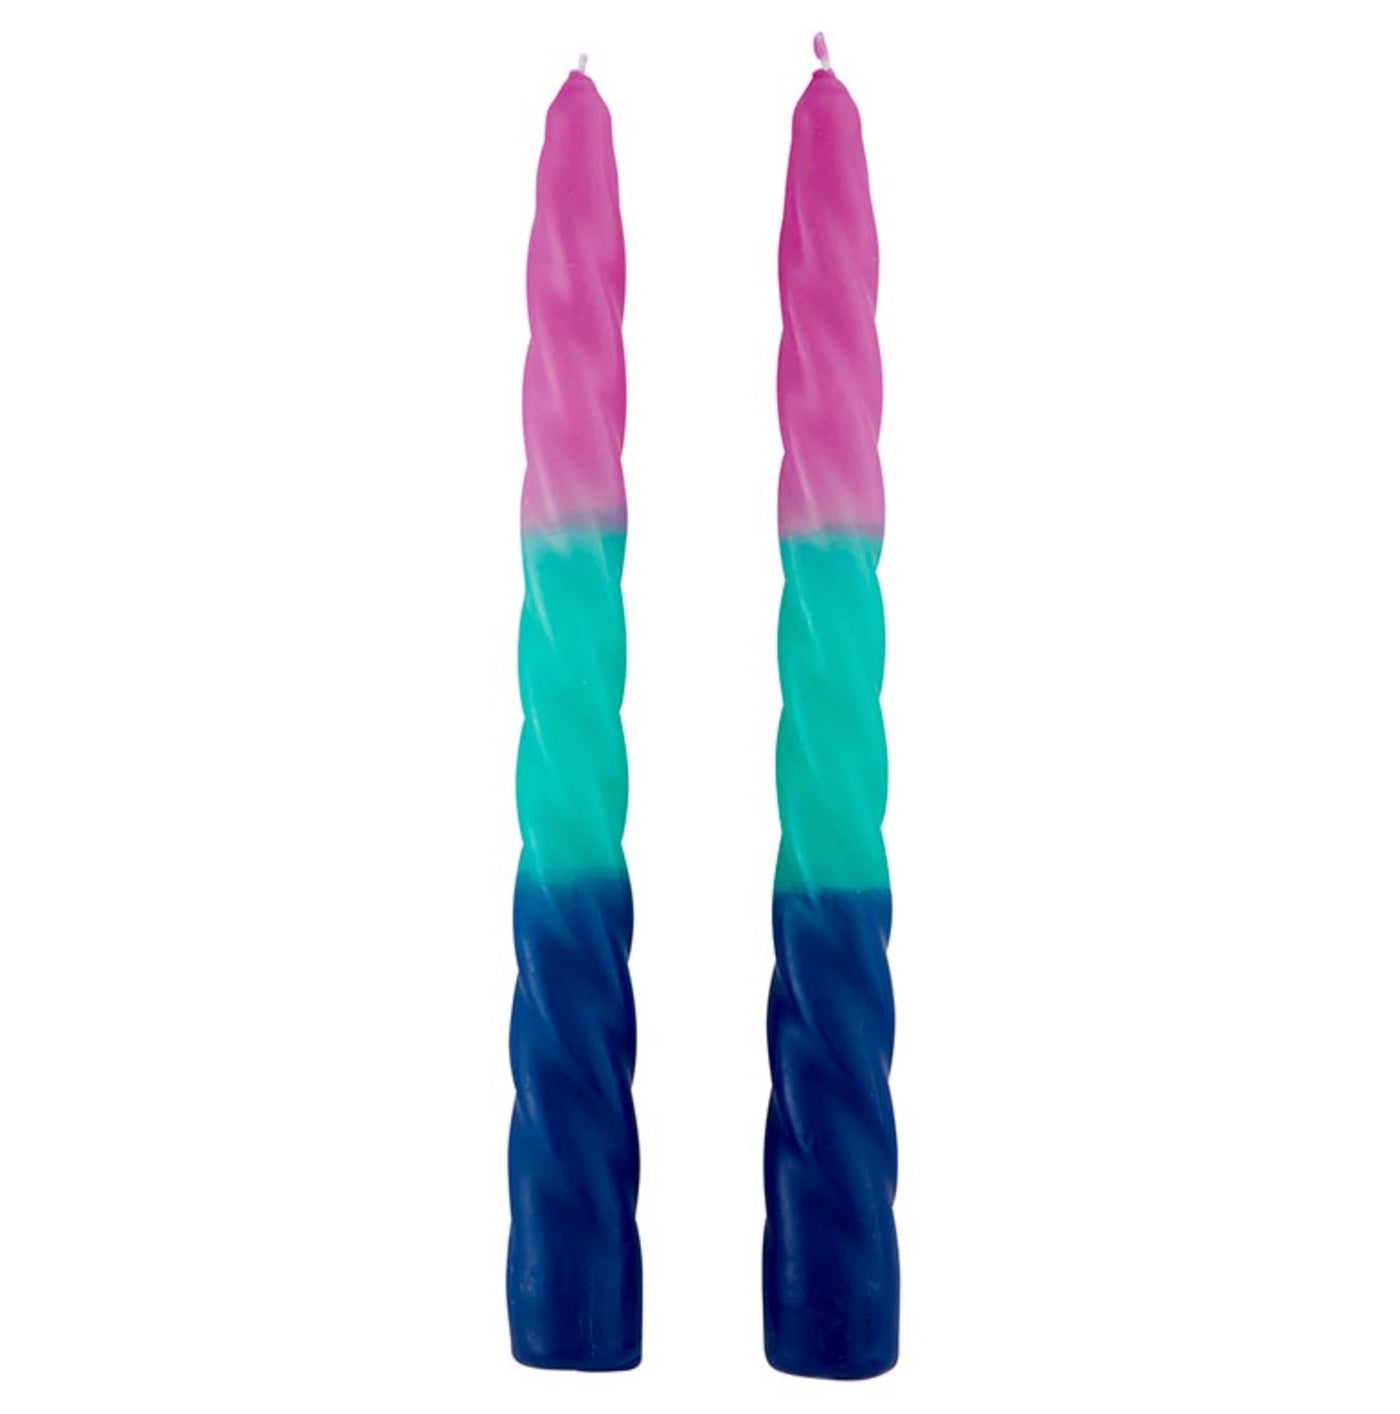 Ombre Tapered Candles